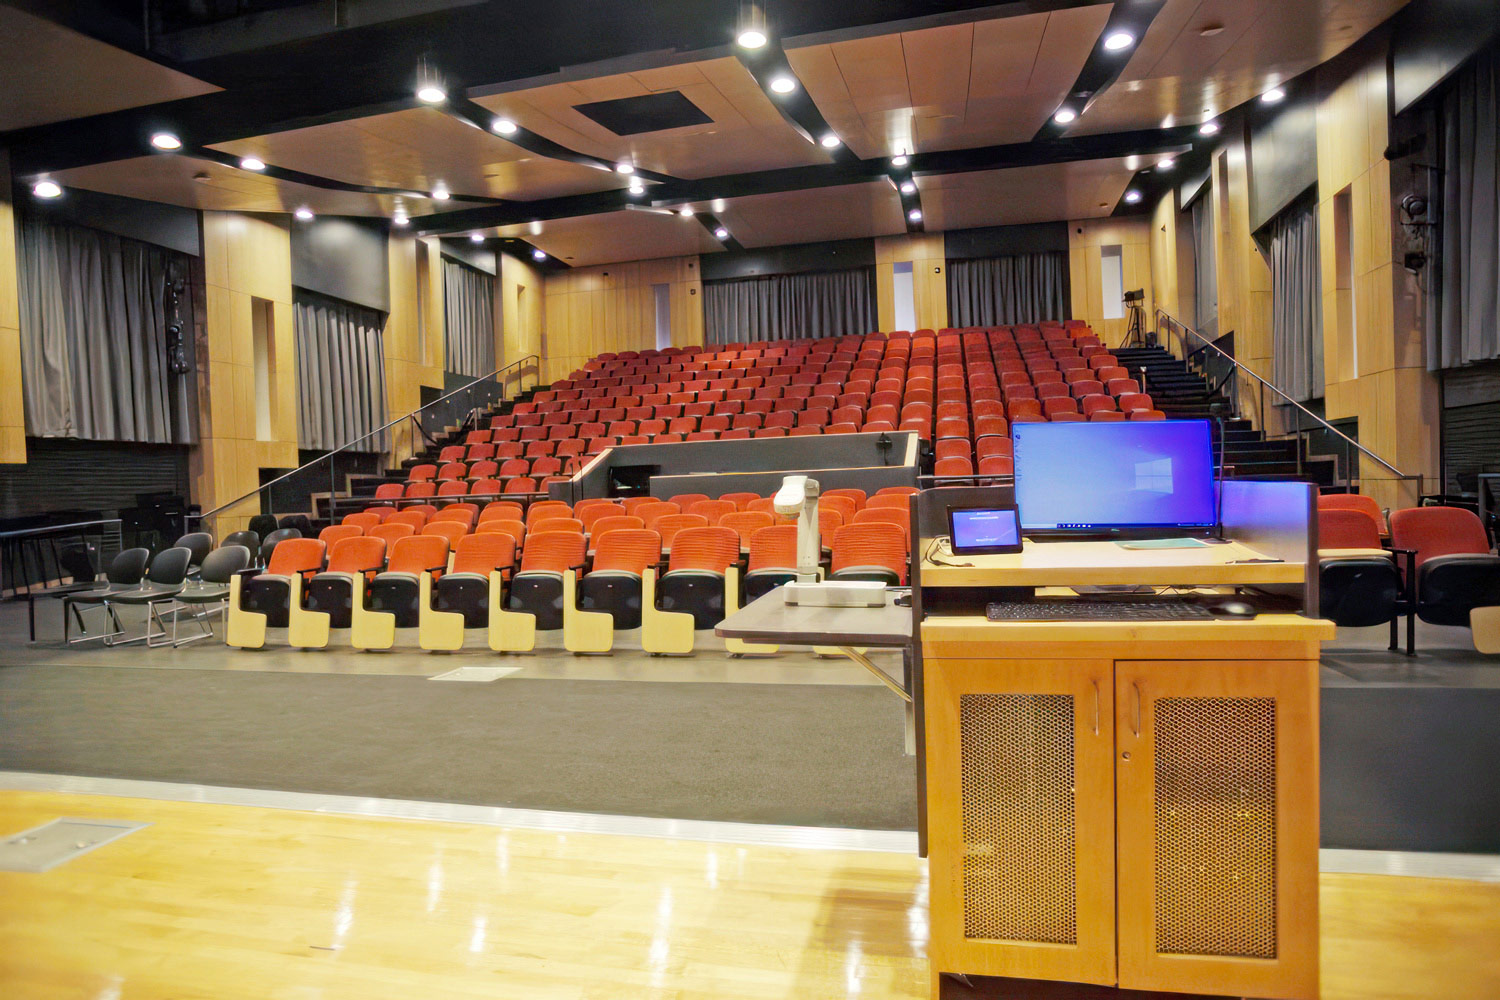 Thumbnail - The 4,600 square foot lecture hall at the Northern Wake Campus includes a stage facing an audience of 275. Equipped with theatrical caliber video, audio, stage lighting, and house lighting, the lecture hall is ideal for hosting presentations, plays, singing competitions, local television broadcasts, and more. All photos courtesy of Wake Technical Community College.